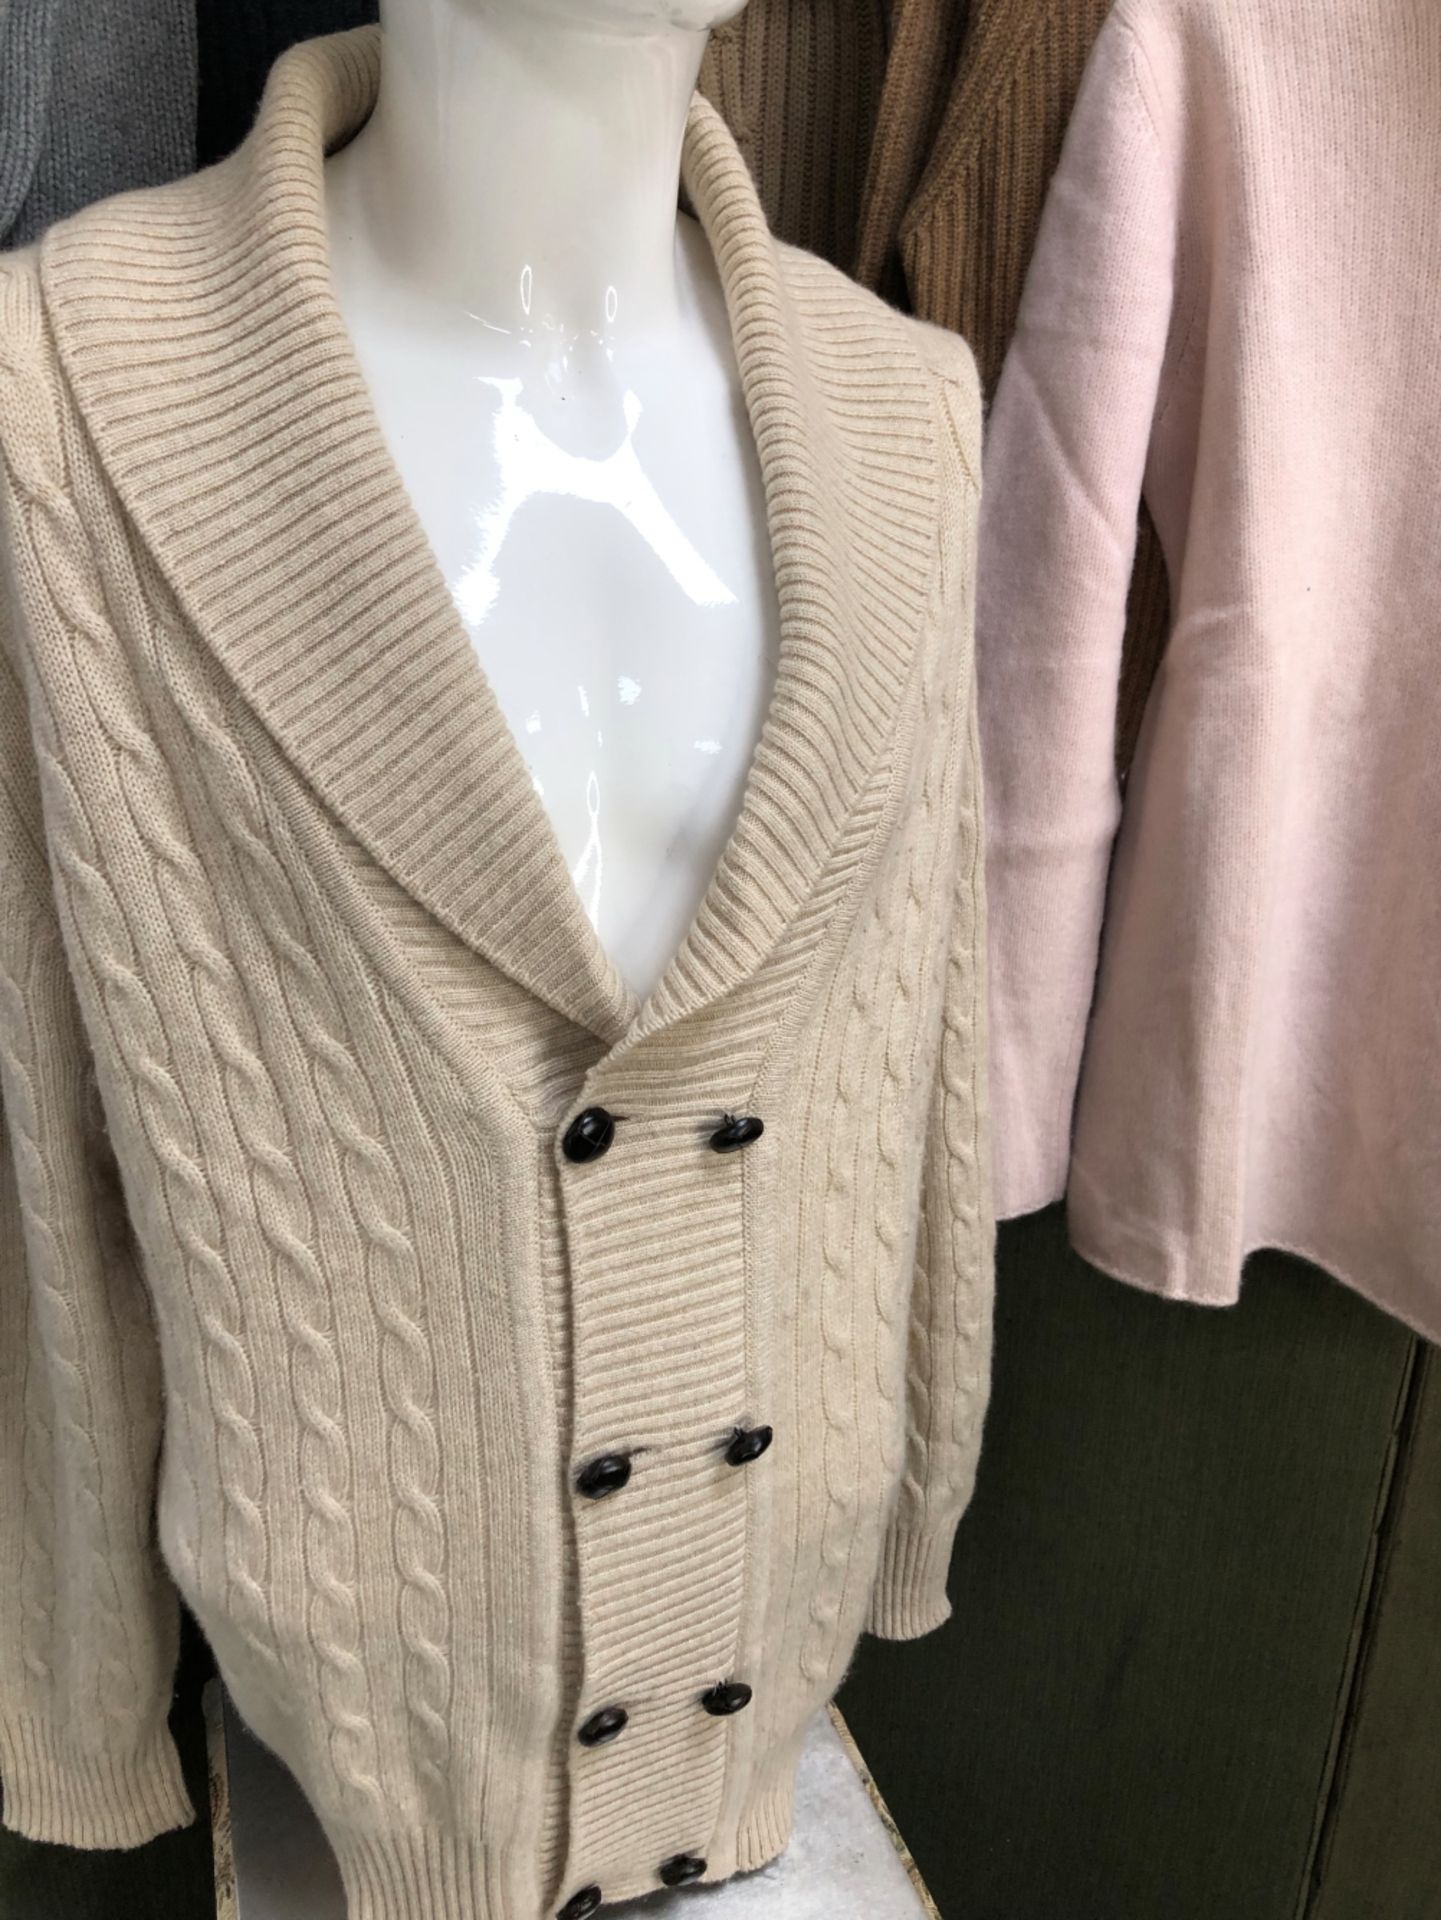 A JOHNSTONS CASHMERE 44" CABLE KNIT CARDIGAN, A KNITTED CARDIGAN WITH NECK TIE, A TSE CASHMERE - Bild 2 aus 16